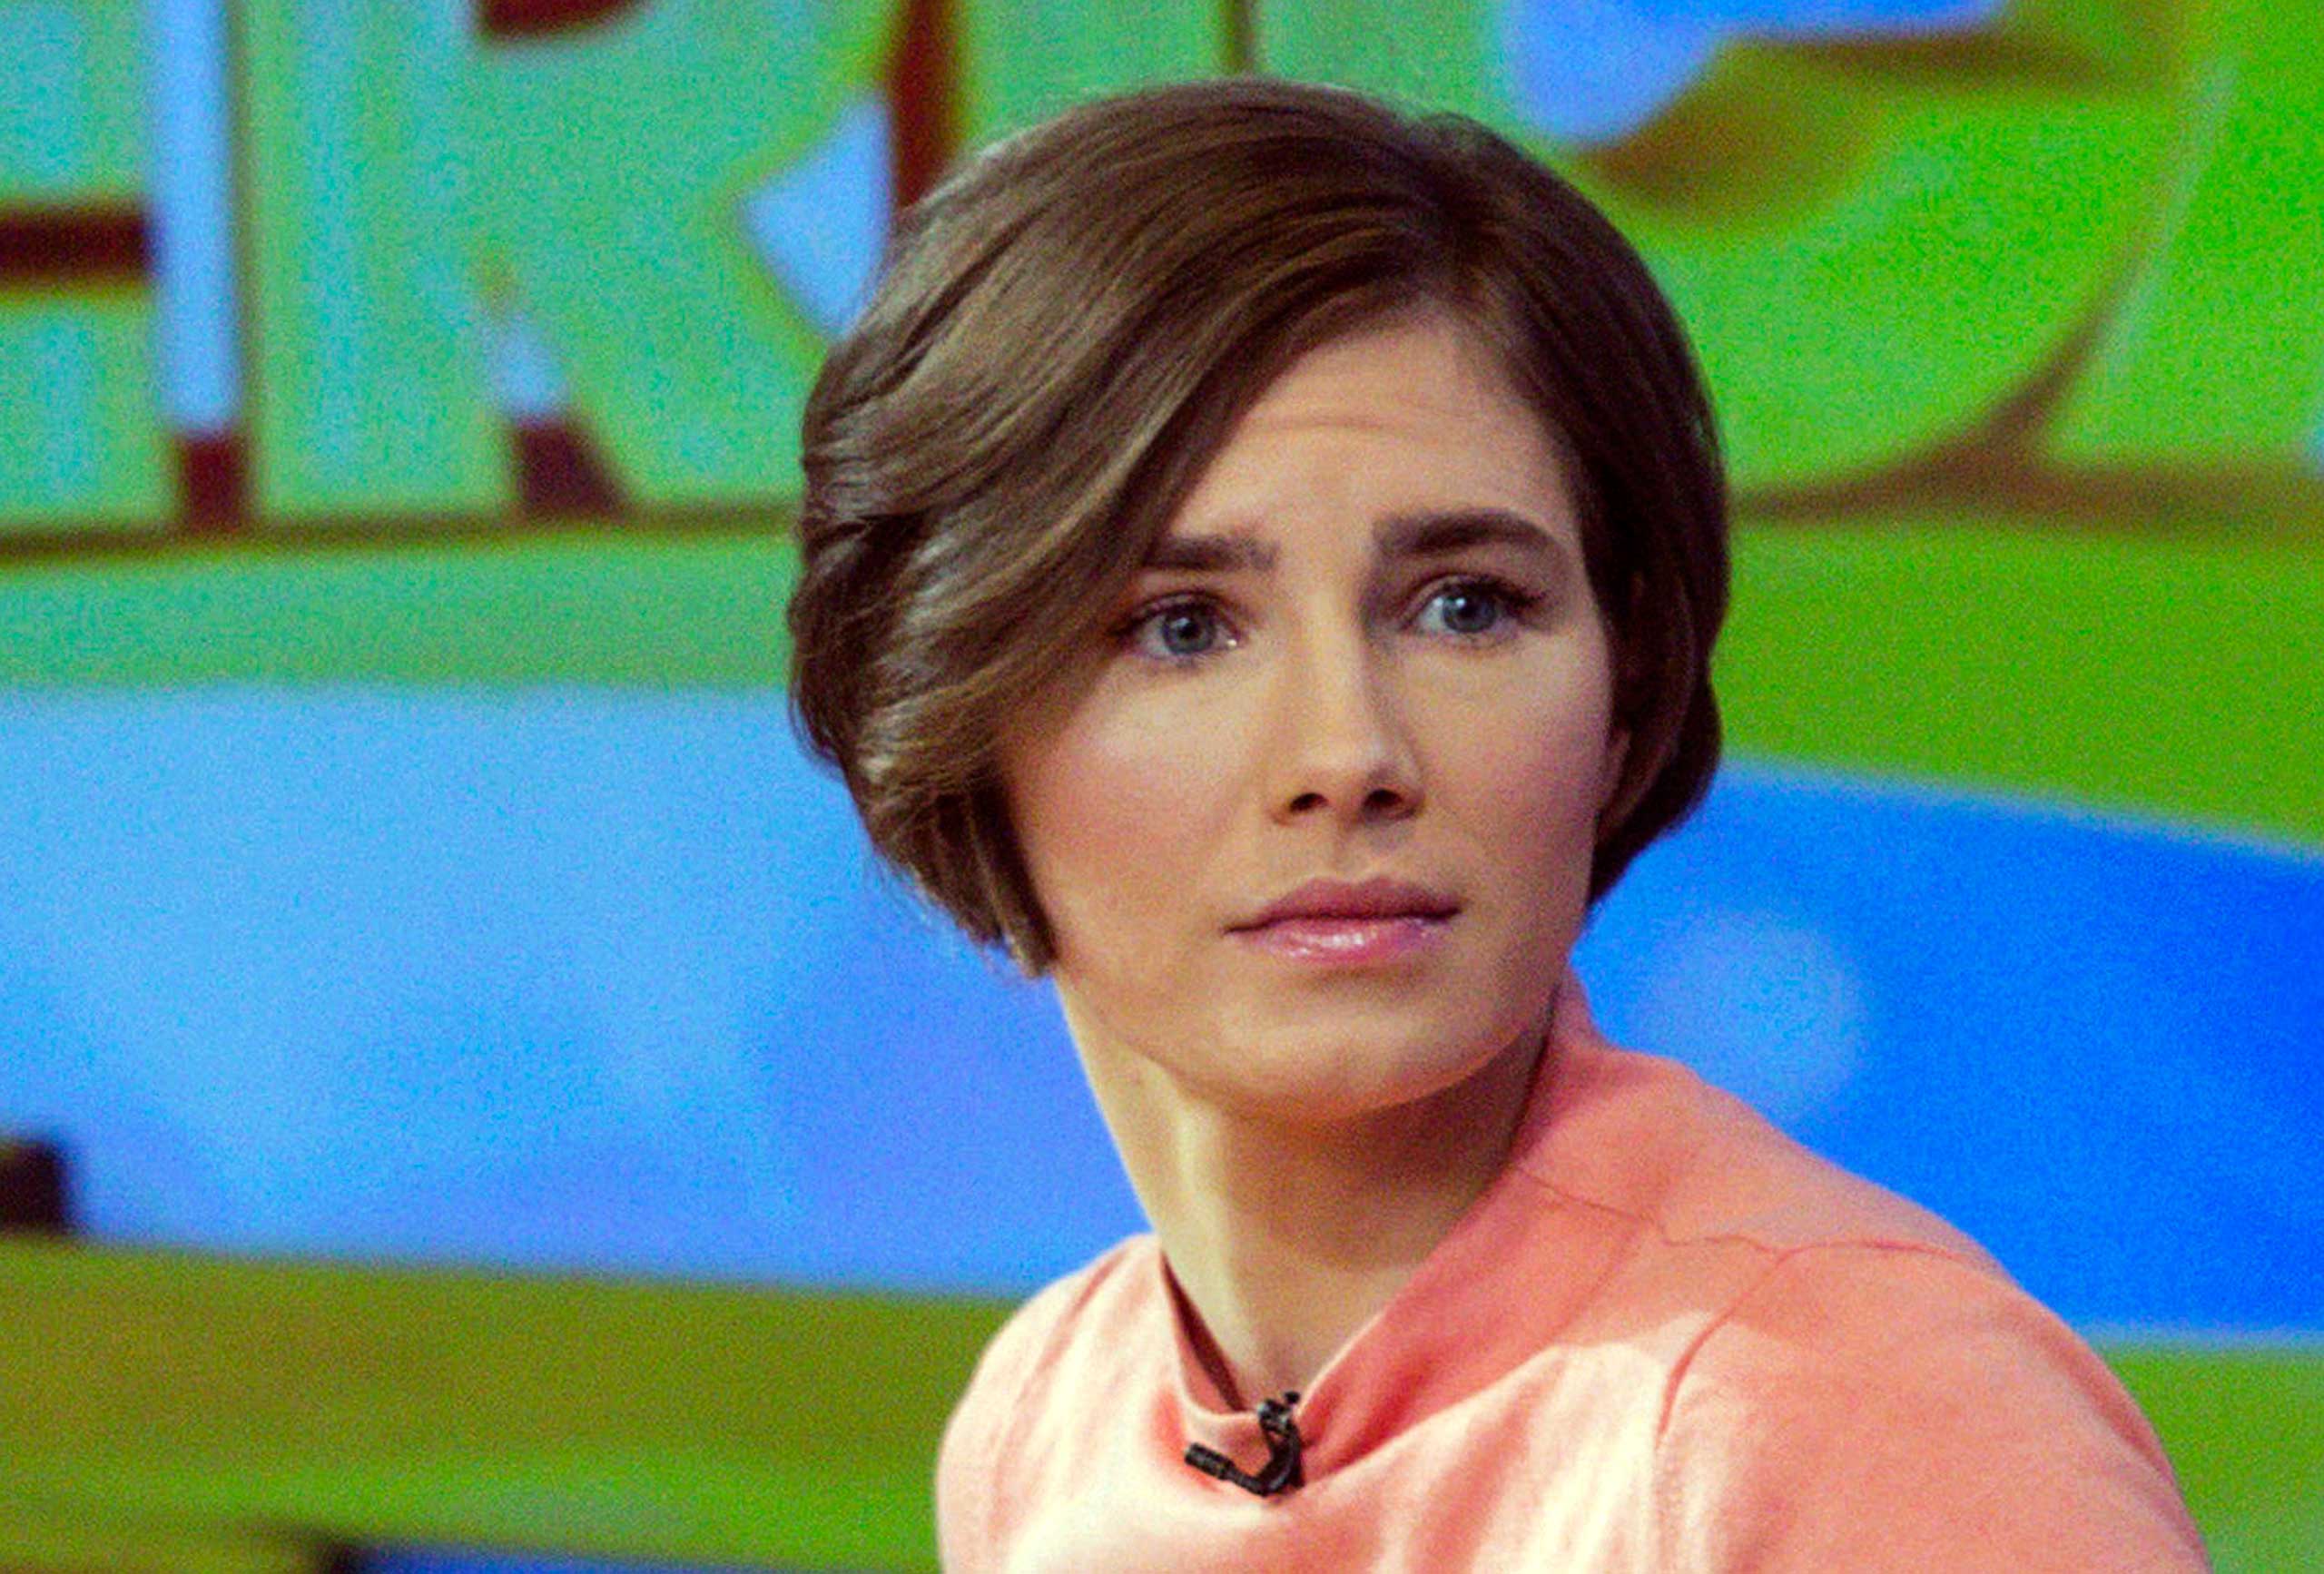 Amanda Knox reacts while being interviewed on the set of ABC's "Good Morning America" in New York in this January 31, 2014 file photo. (Andrew Kelly—Reuters/Corbis)